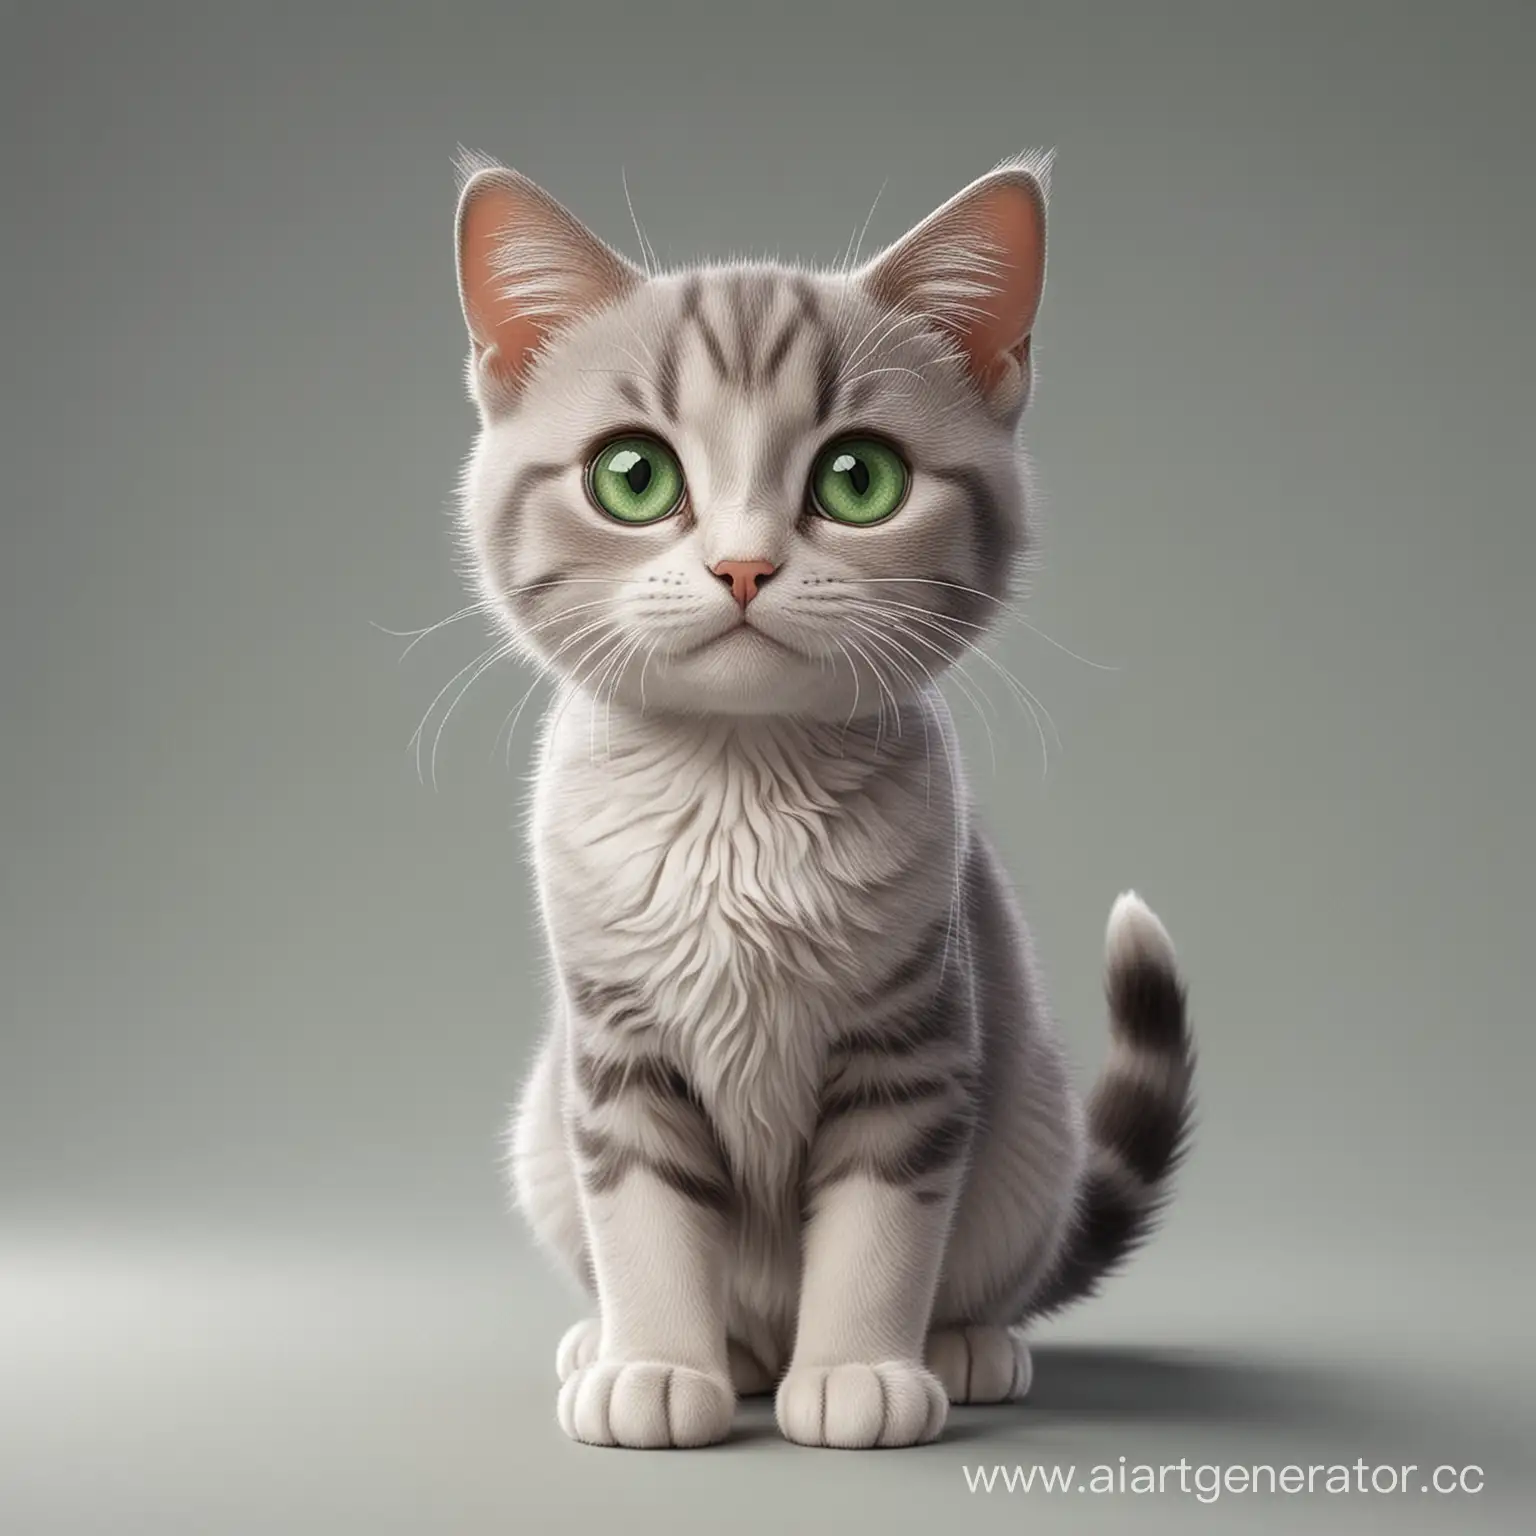 Adorable-Cartoon-Cat-with-Green-Eyes-Against-Gray-Background